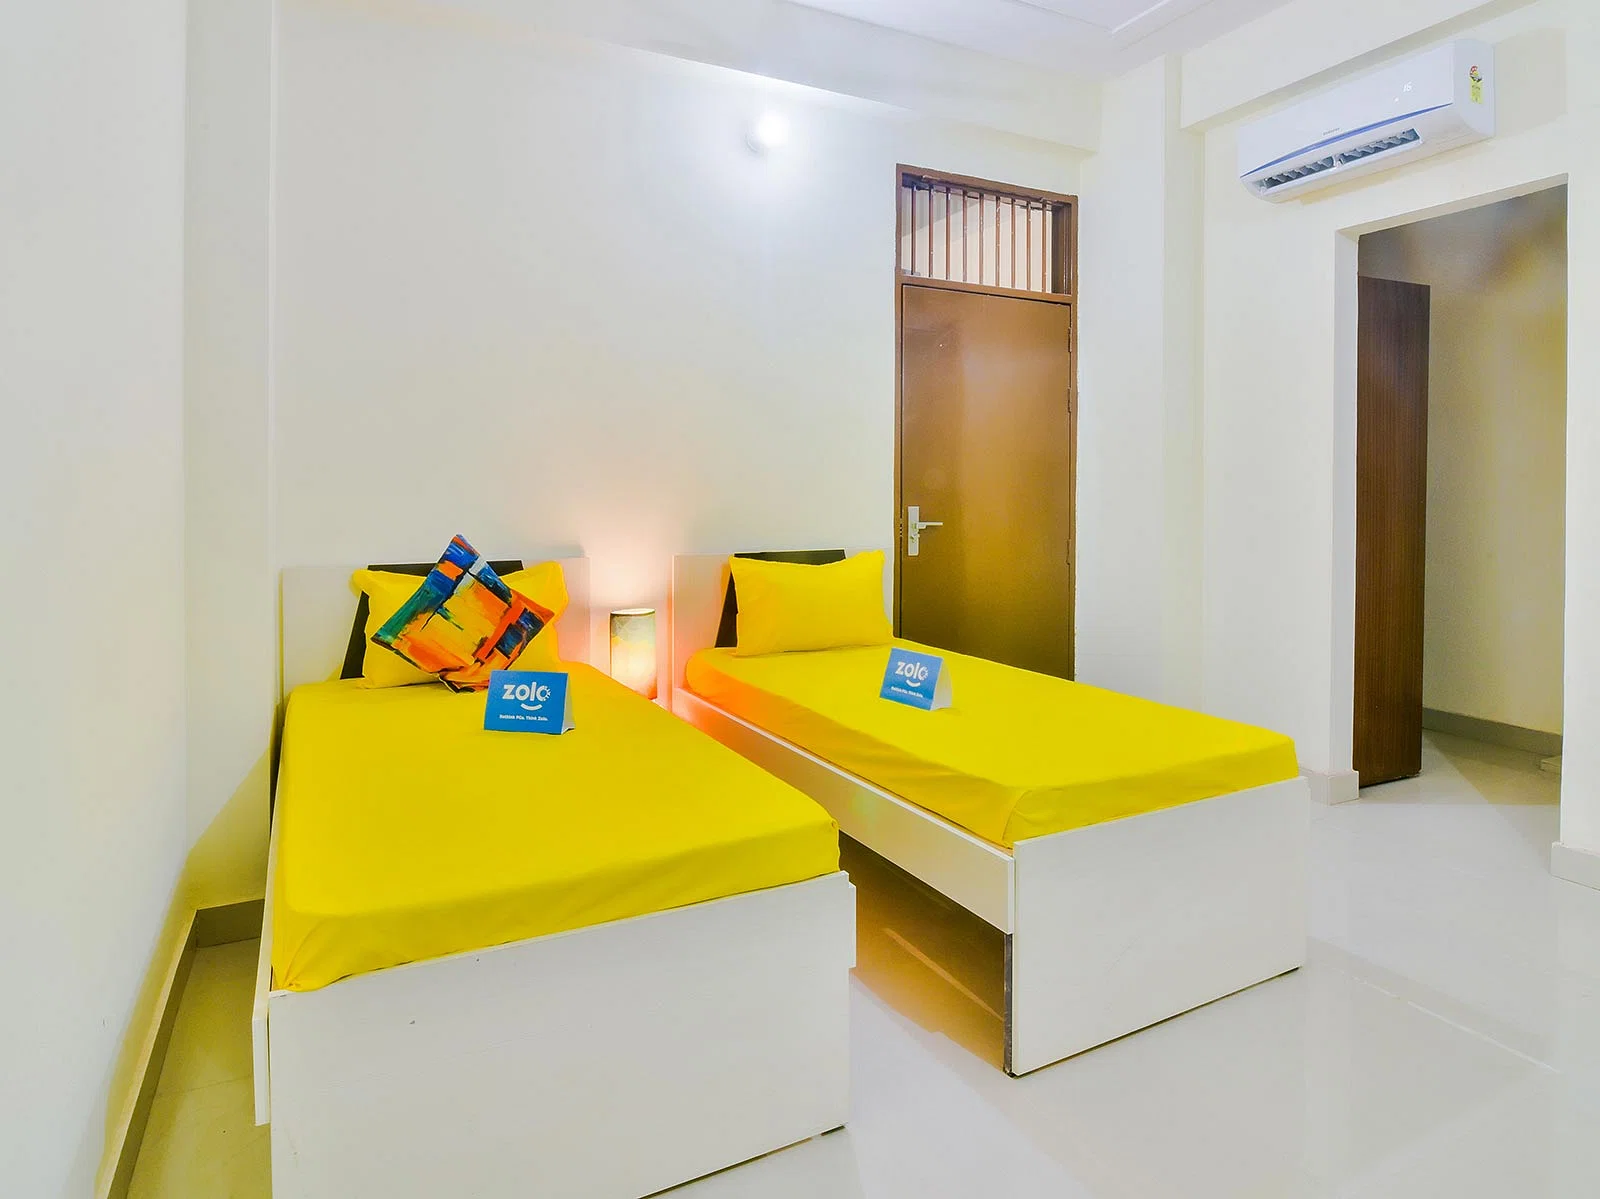 fully furnished Zolo single rooms for rent near me-check out now-Zolo La Lagoon